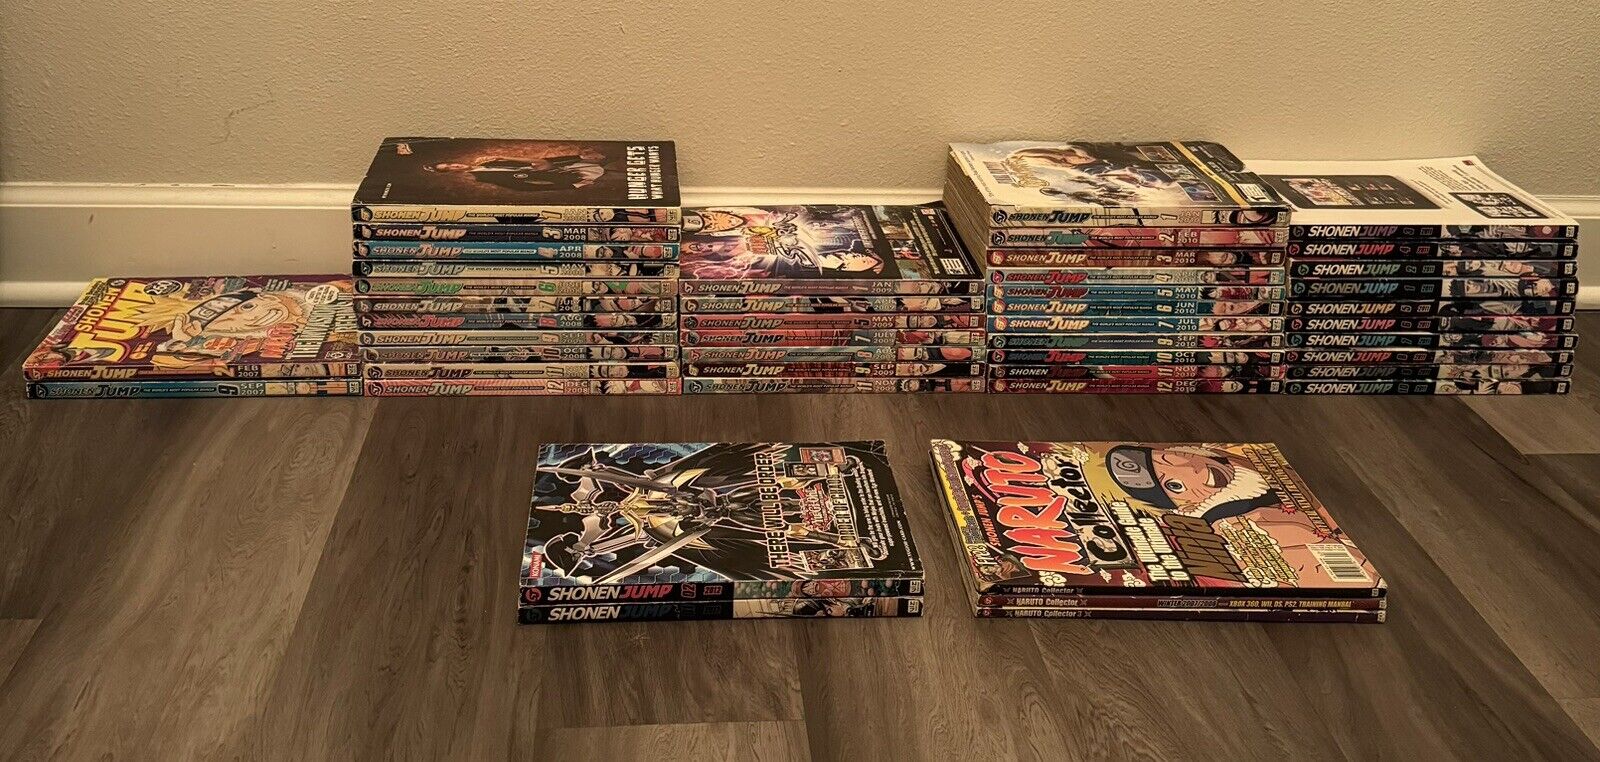 Offers Accepted: Shonen Jump Magazine Lot 2007-2012 (41 Magazines) Missing Few